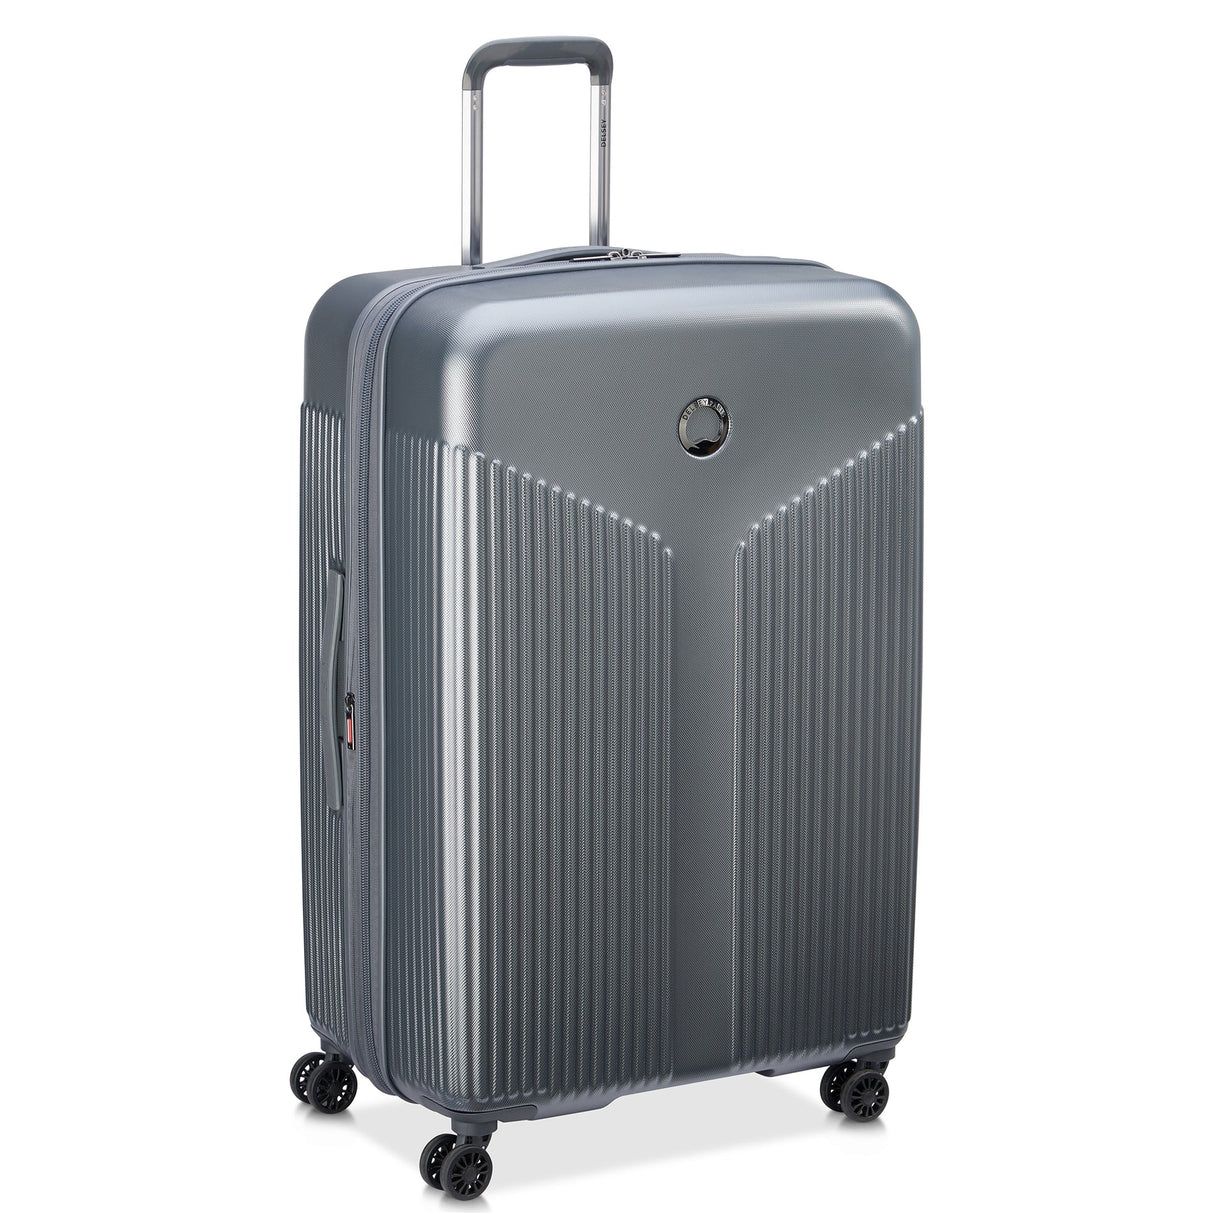 Delsey Comete 3.0 Large Expandable Spinner , , delsey-comete-3.0-40387983001SI-02_1800x1800_a89fb374-2732-4862-860f-b5e152470cc1